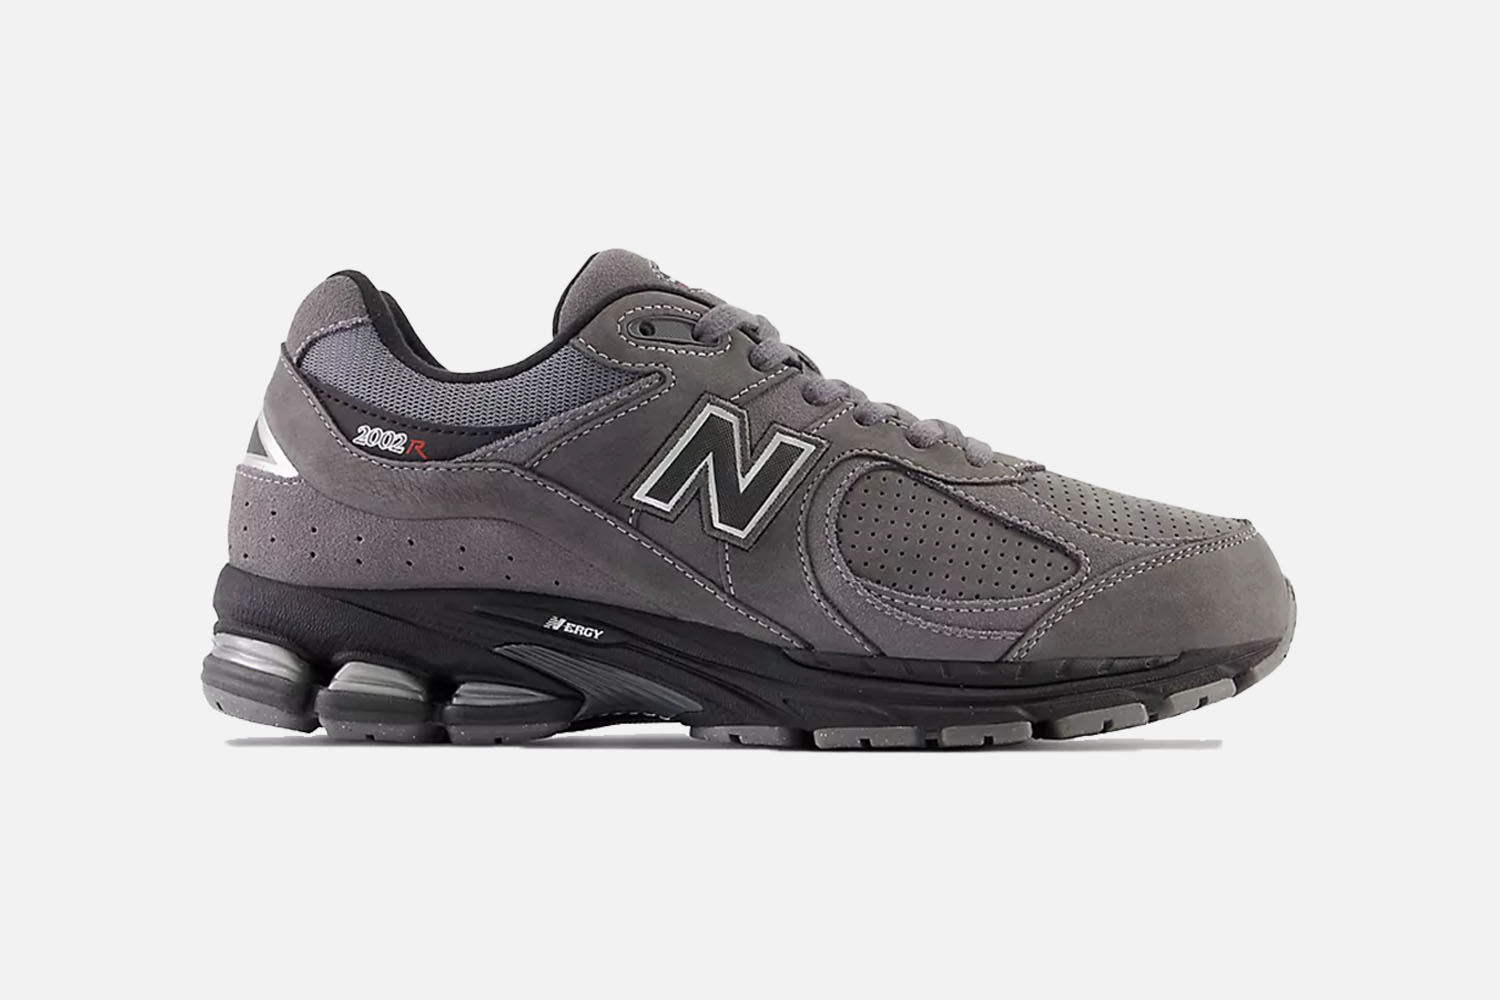 New Balance Lawsuit Forces Balance Athletica to Rebrand as Vitality